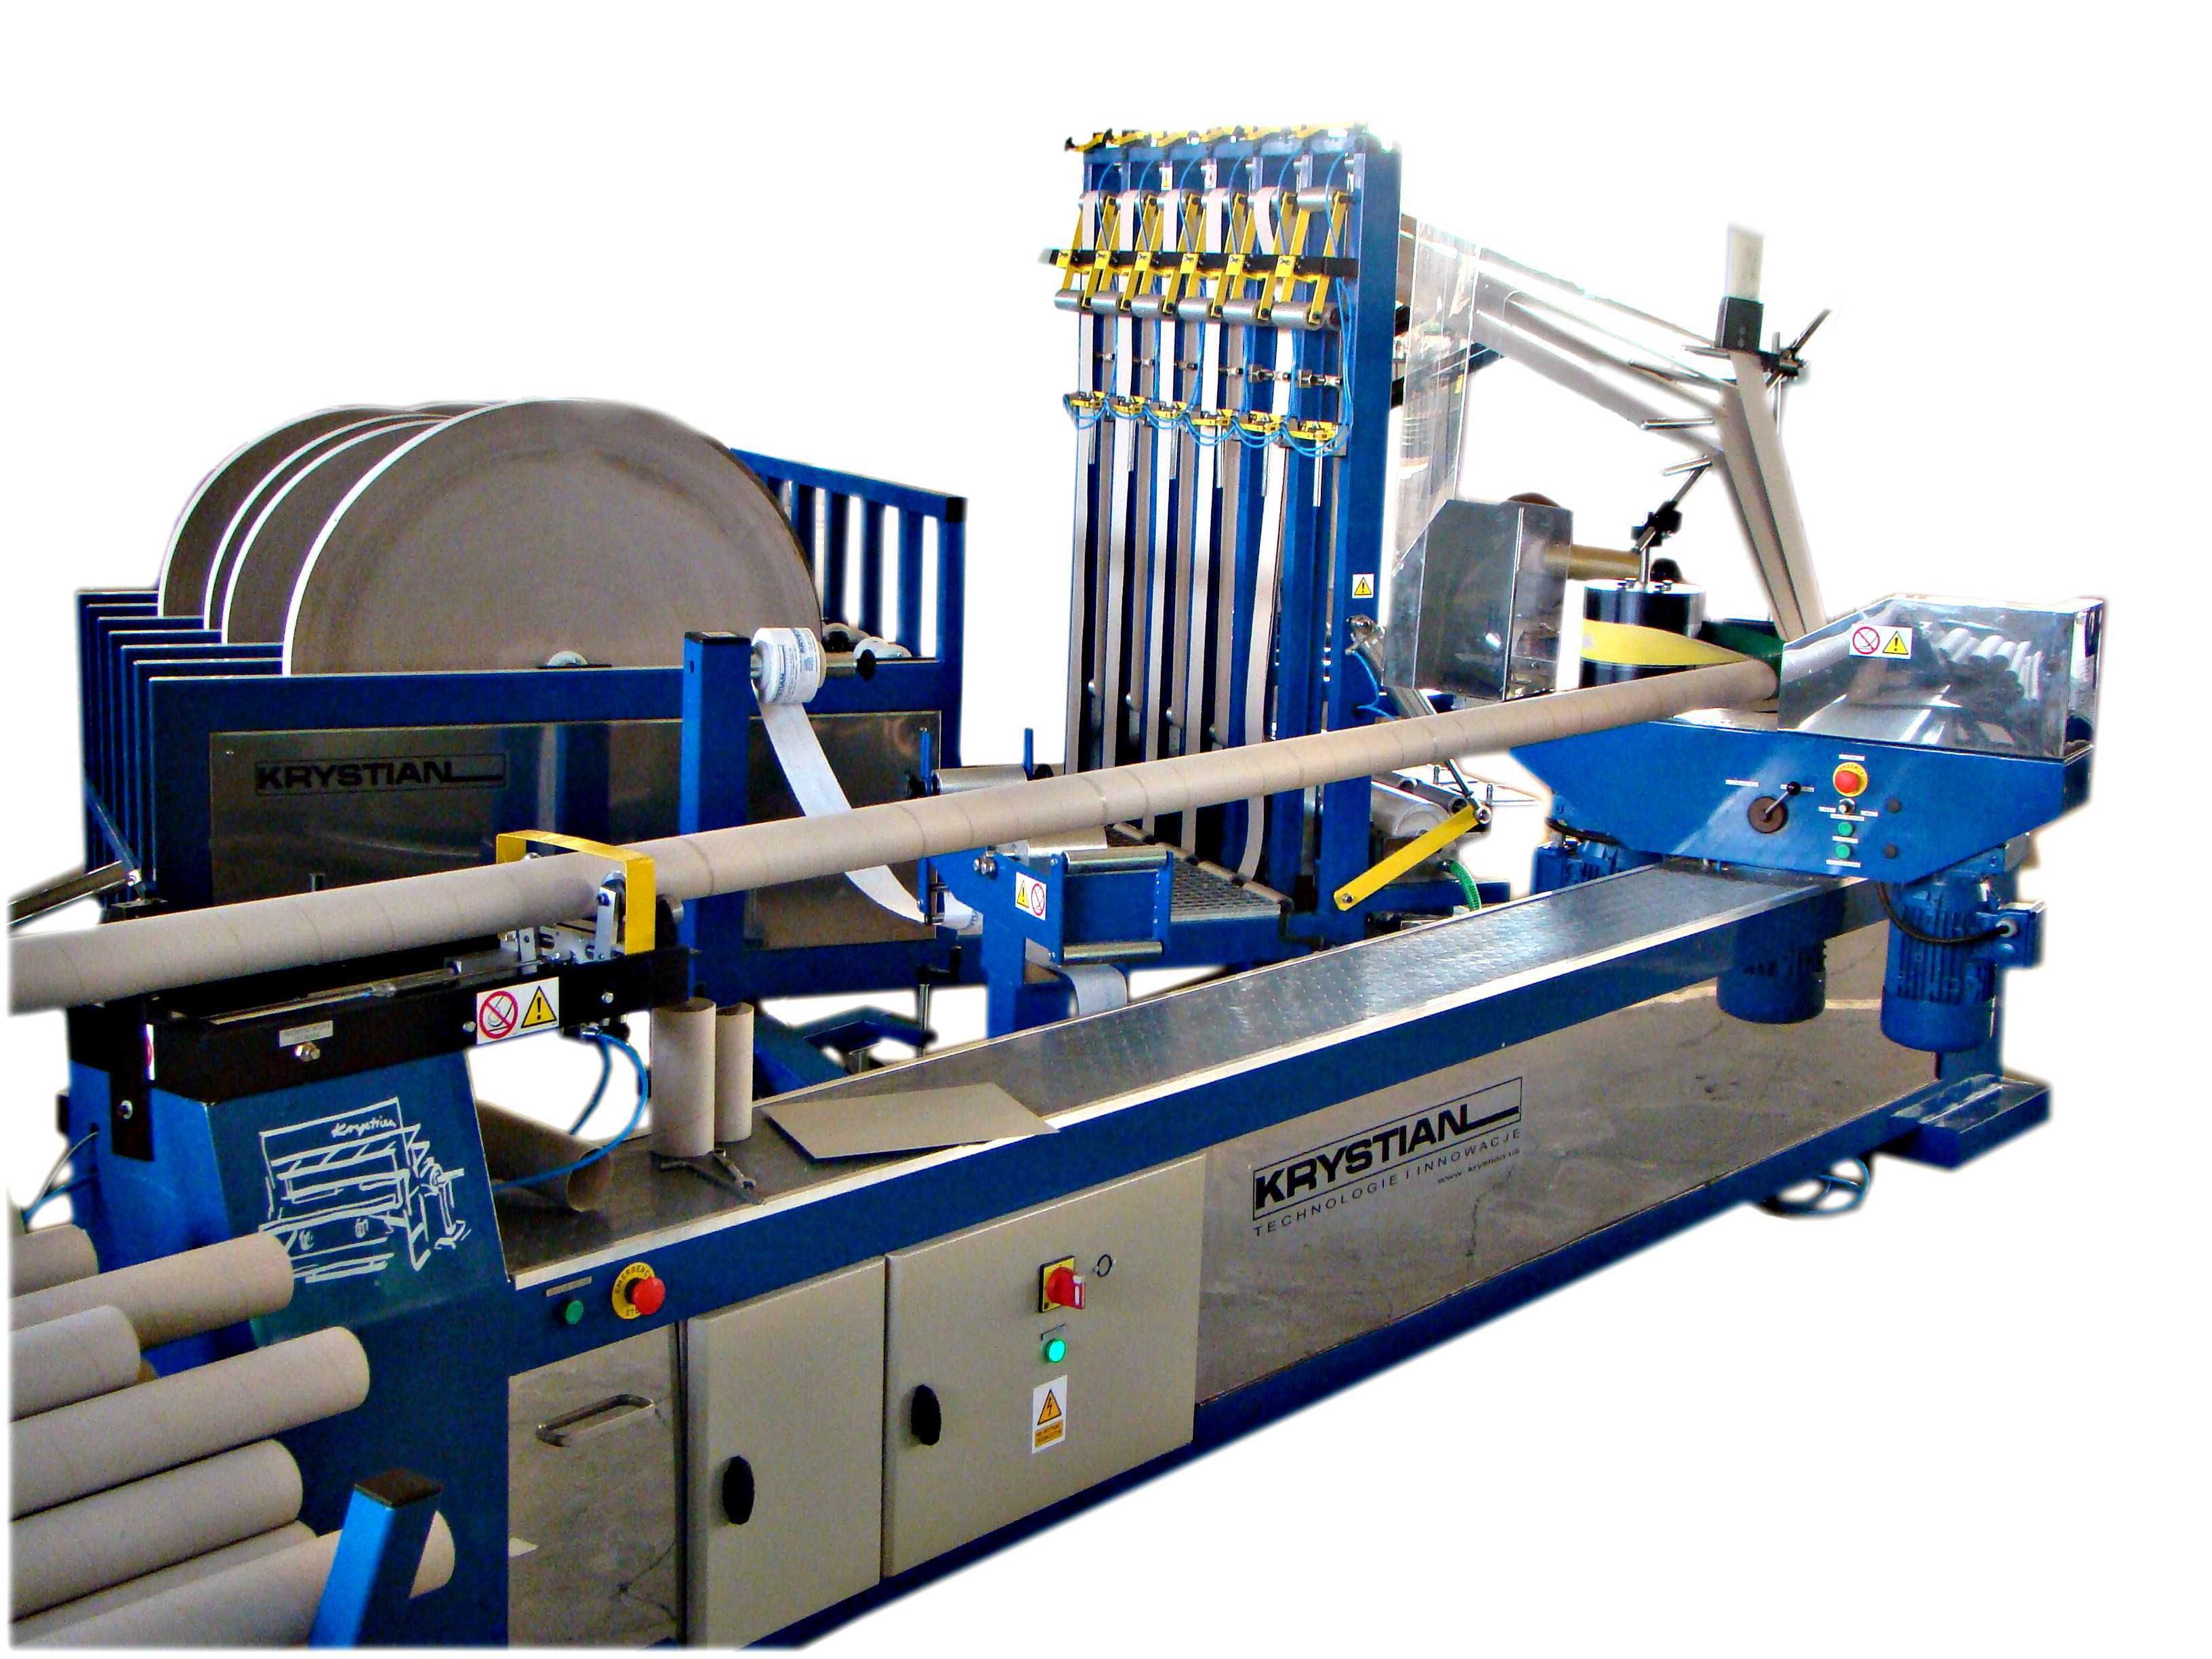 6 web paper core making machine with one cutter